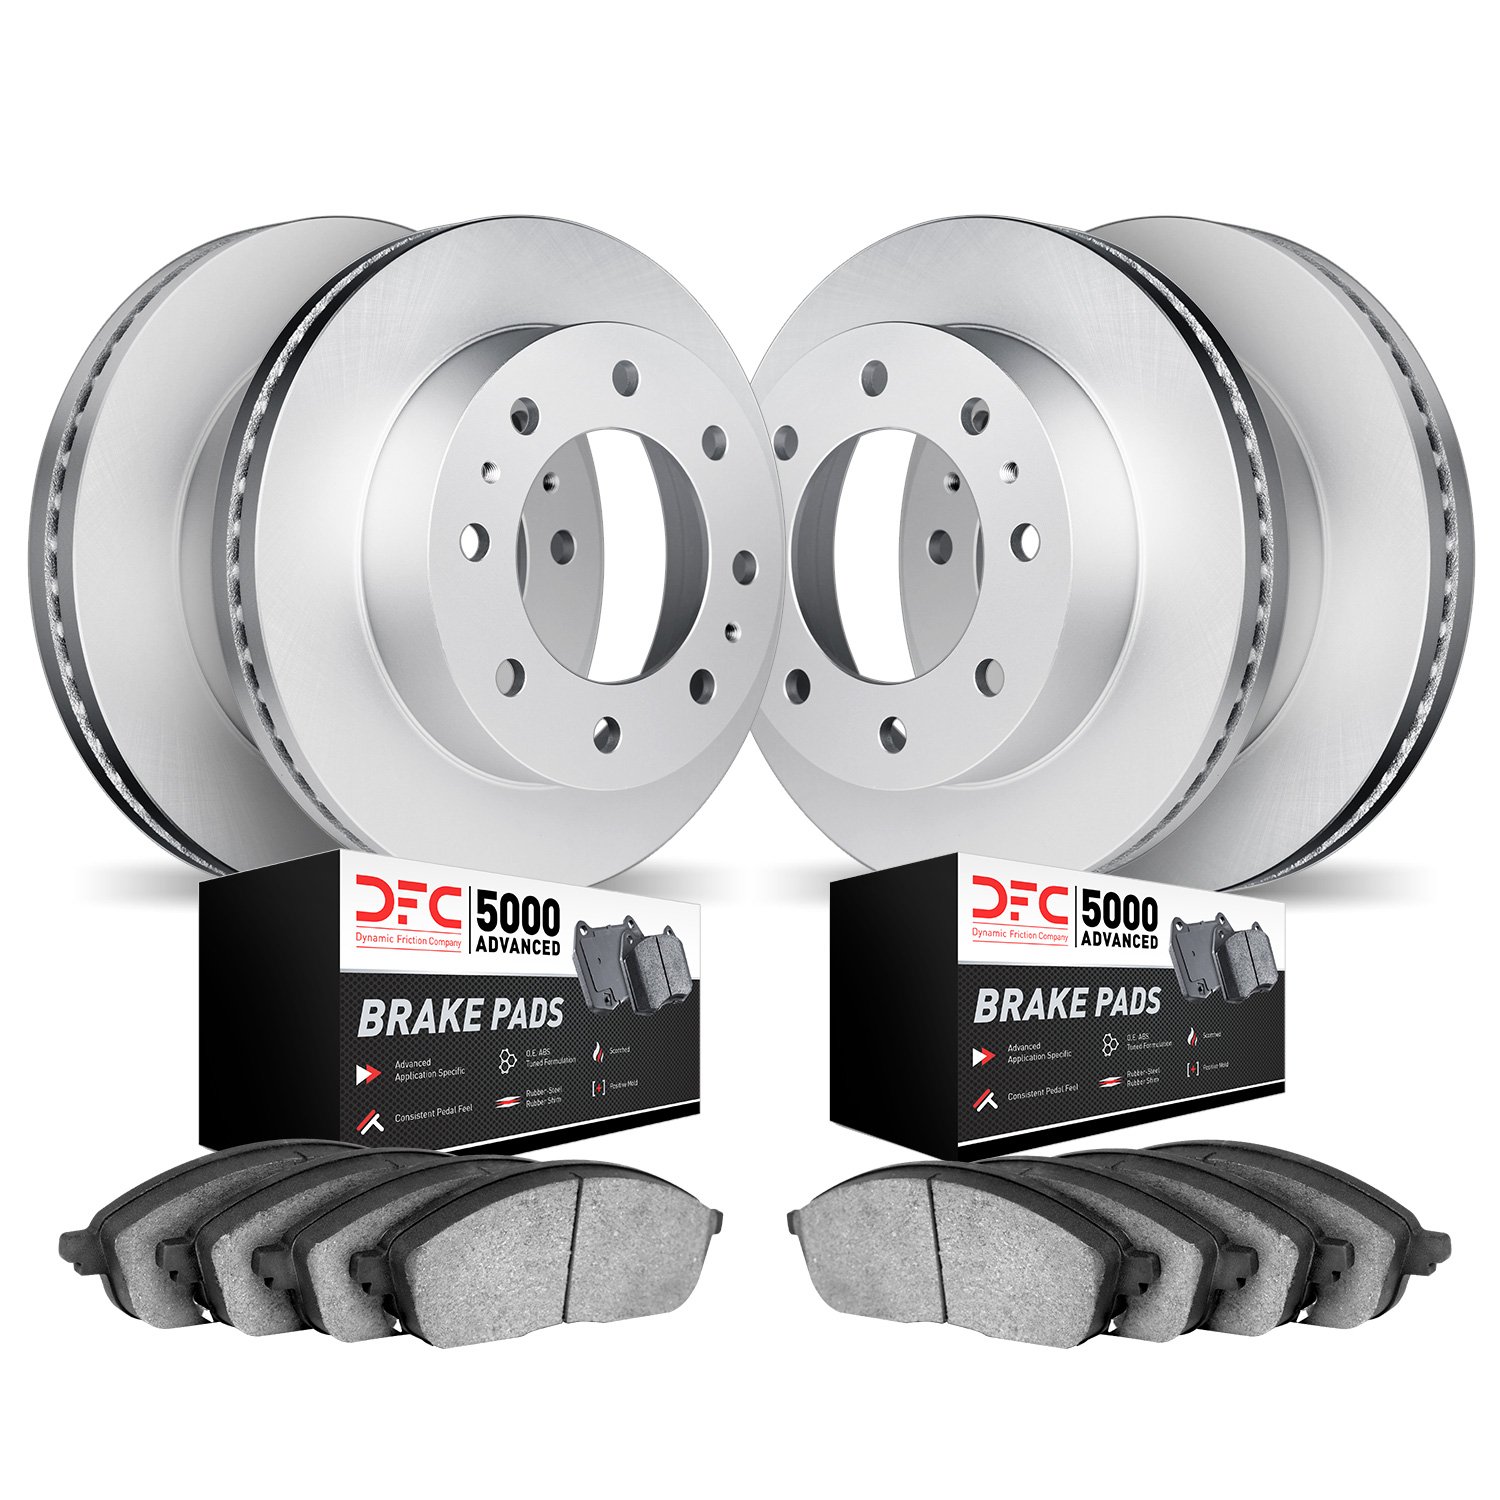 4504-54057 Geospec Brake Rotors w/5000 Advanced Brake Pads Kit, 2006-2010 Ford/Lincoln/Mercury/Mazda, Position: Front and Rear